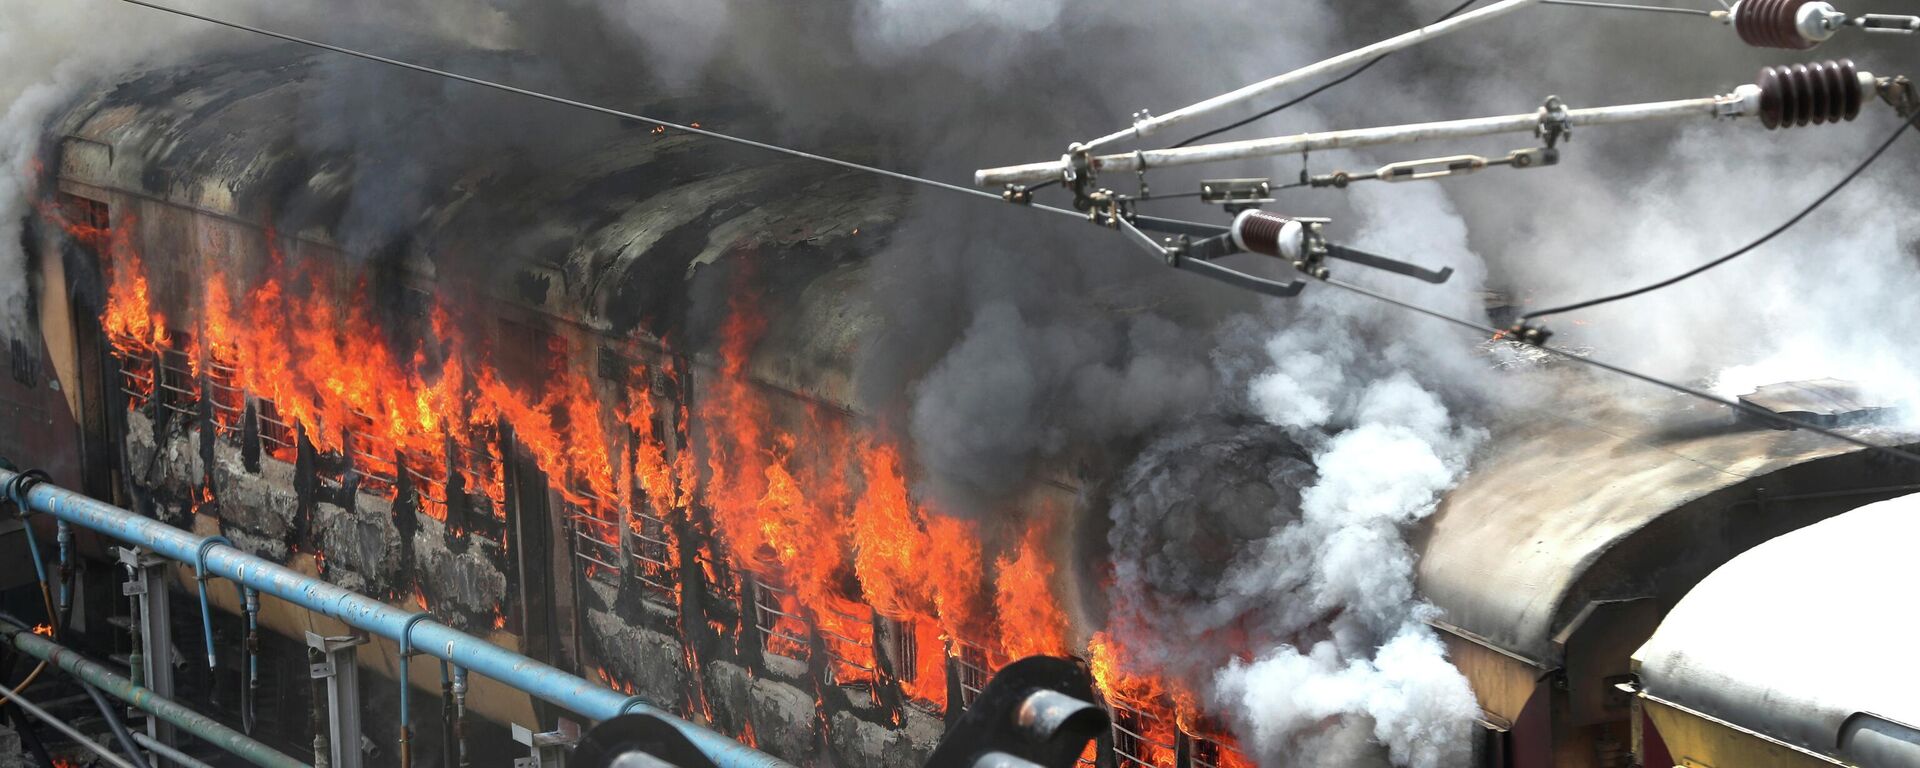 Flames rise from a train set on fire by protestorsat Secundrabad railroad station in Hyderabad, India, Friday, June 17, 2022 - Sputnik International, 1920, 17.06.2022